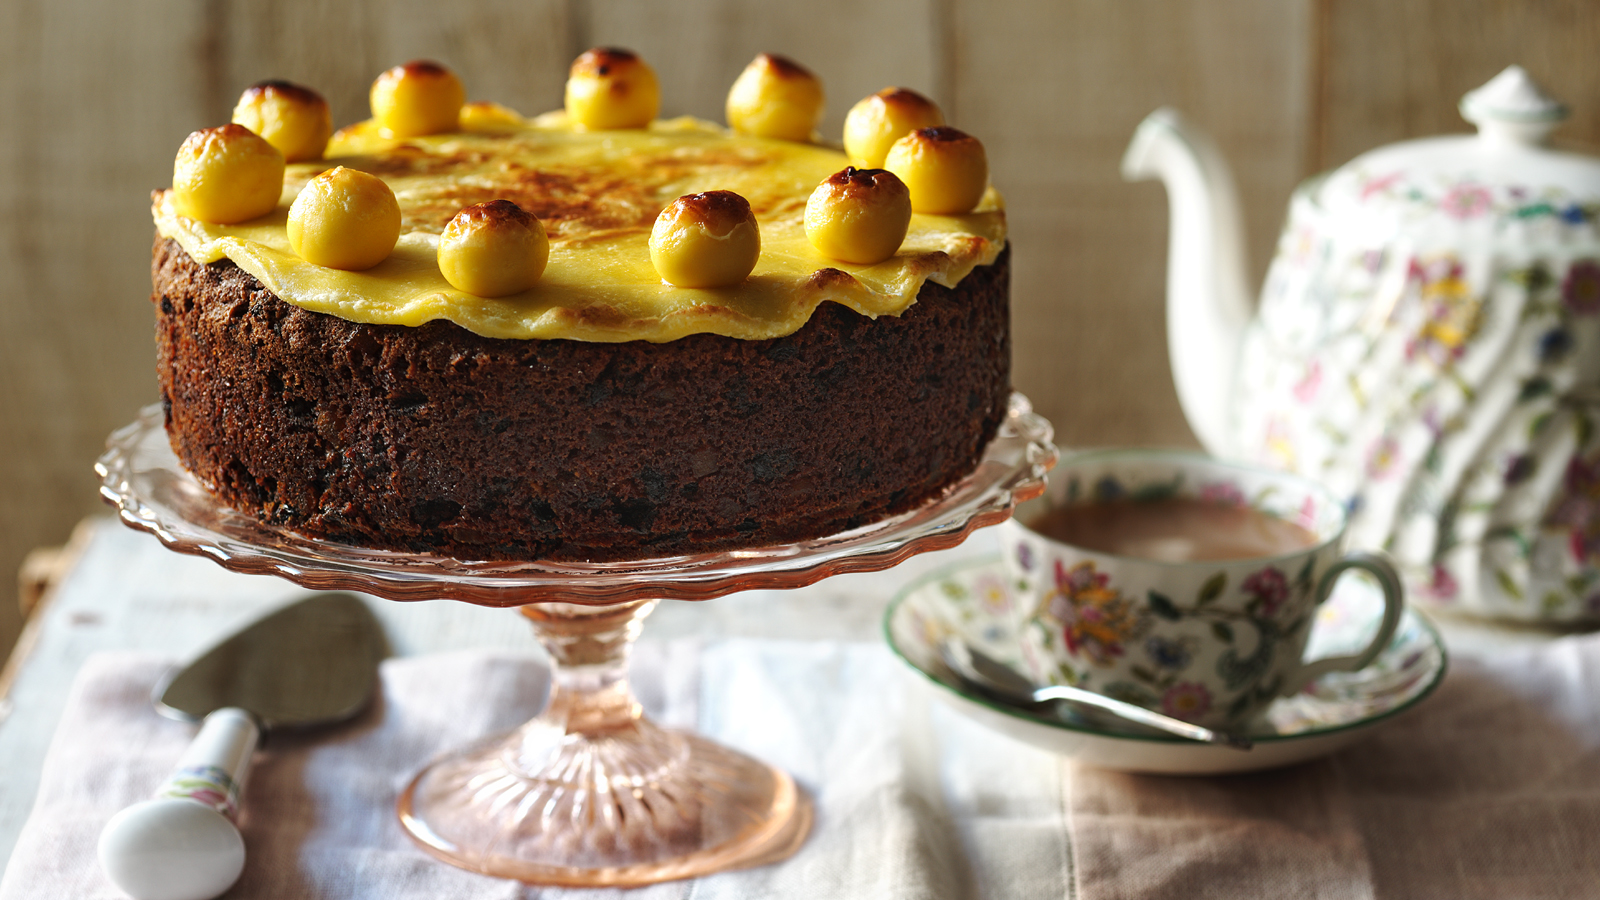 Simnel cake for Mother's Day. We now have them at Easter, but they were  traditionally eaten on Mother's Day, which falls in the middle of Lent and  offering respite from 40 days